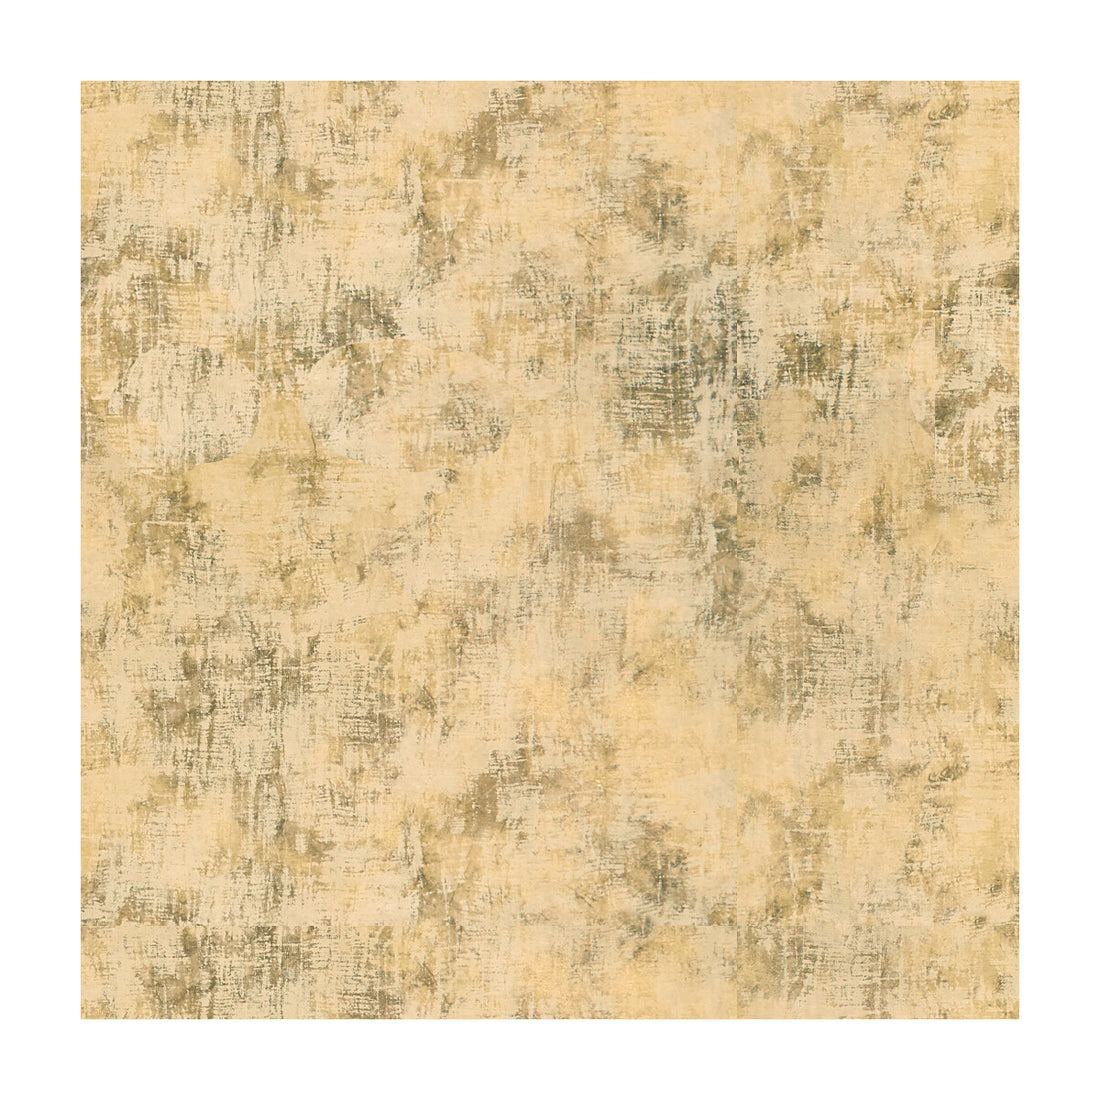 Kravet Couture fabric in ravage-416 color - pattern RAVAGE.416.0 - by Kravet Couture